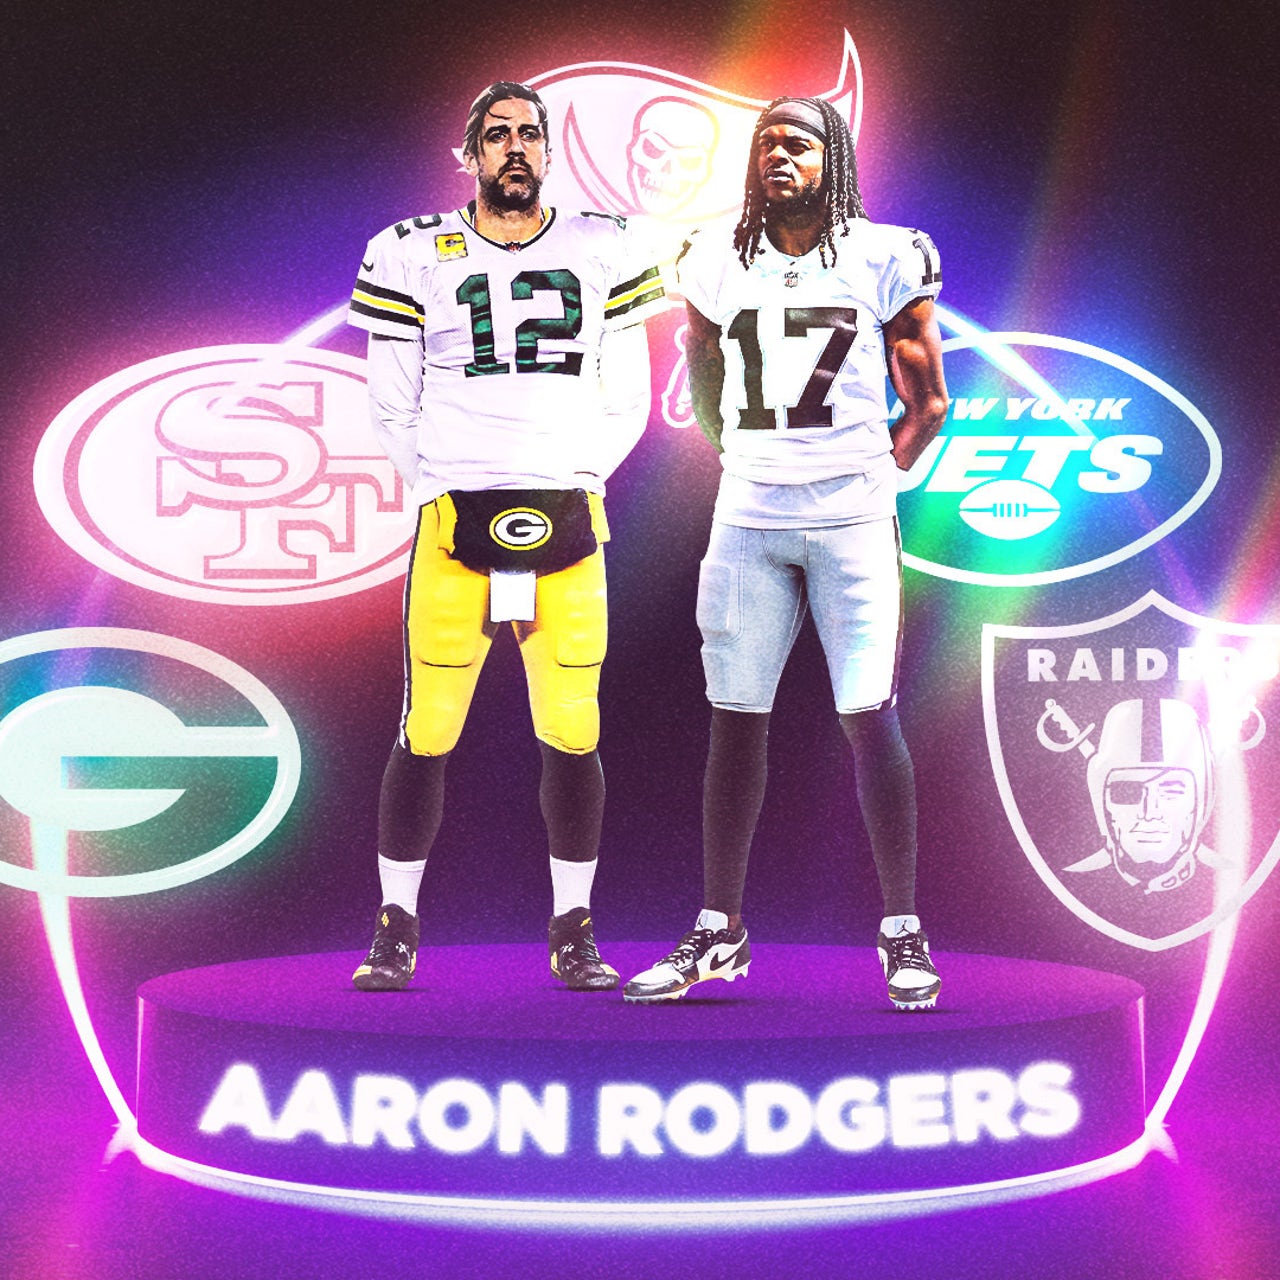 Jets vs. Raiders: Which team is better for Aaron Rodgers?